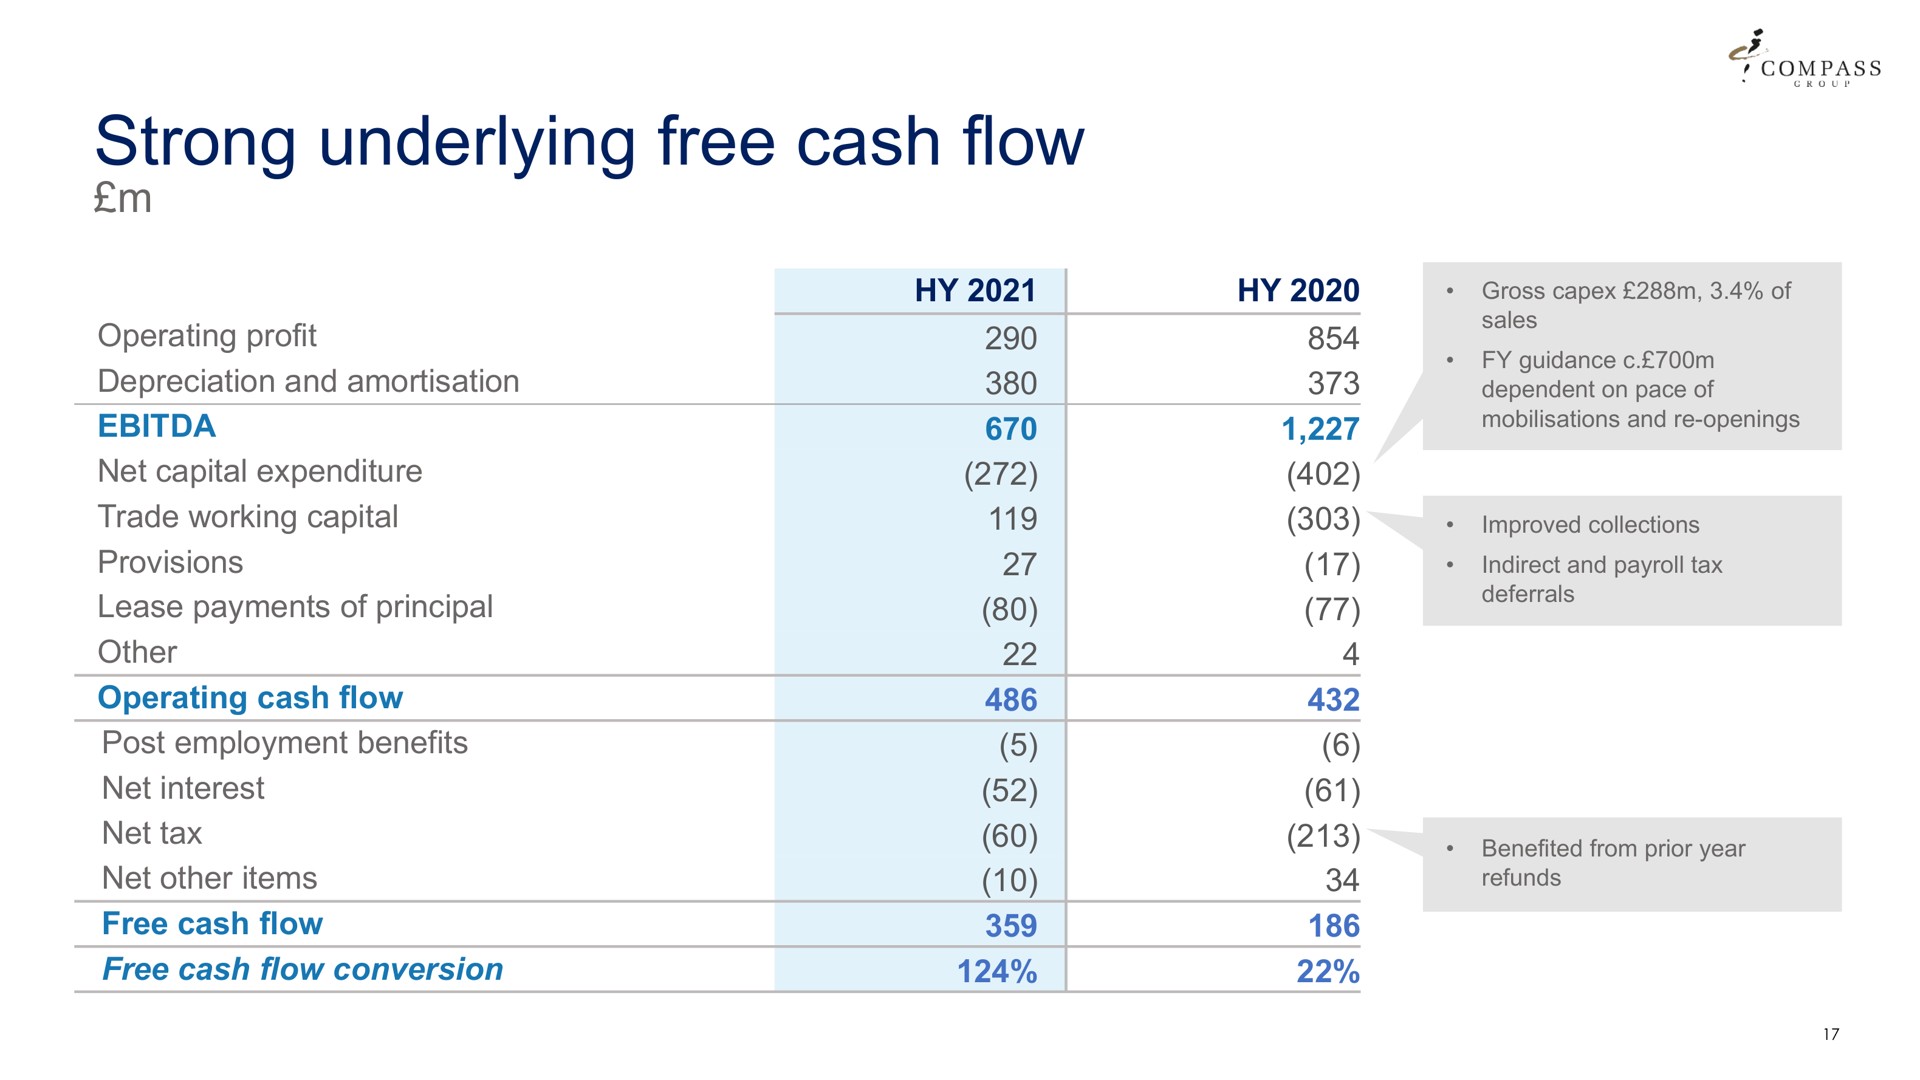 strong underlying free cash flow | Compass Group